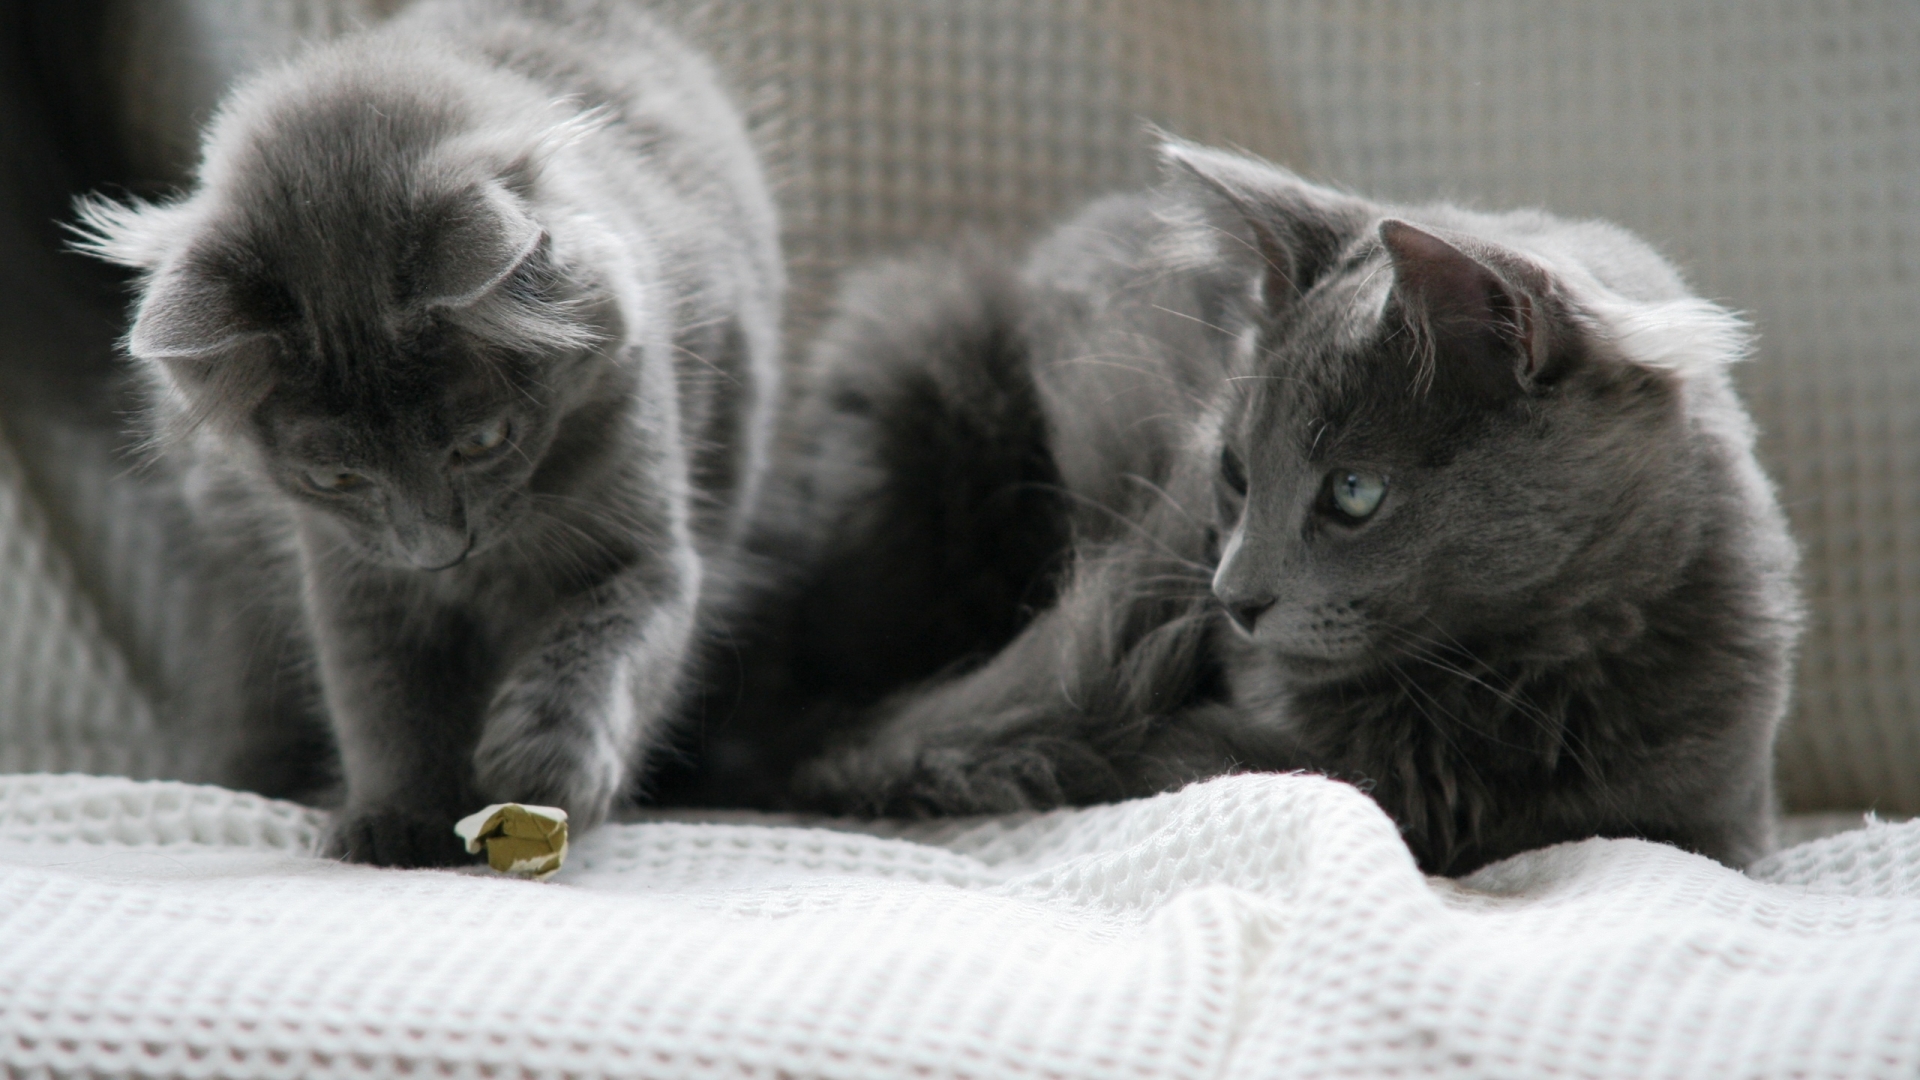 Beautiful Pair of Nebelung Cats for 1920 x 1080 HDTV 1080p resolution